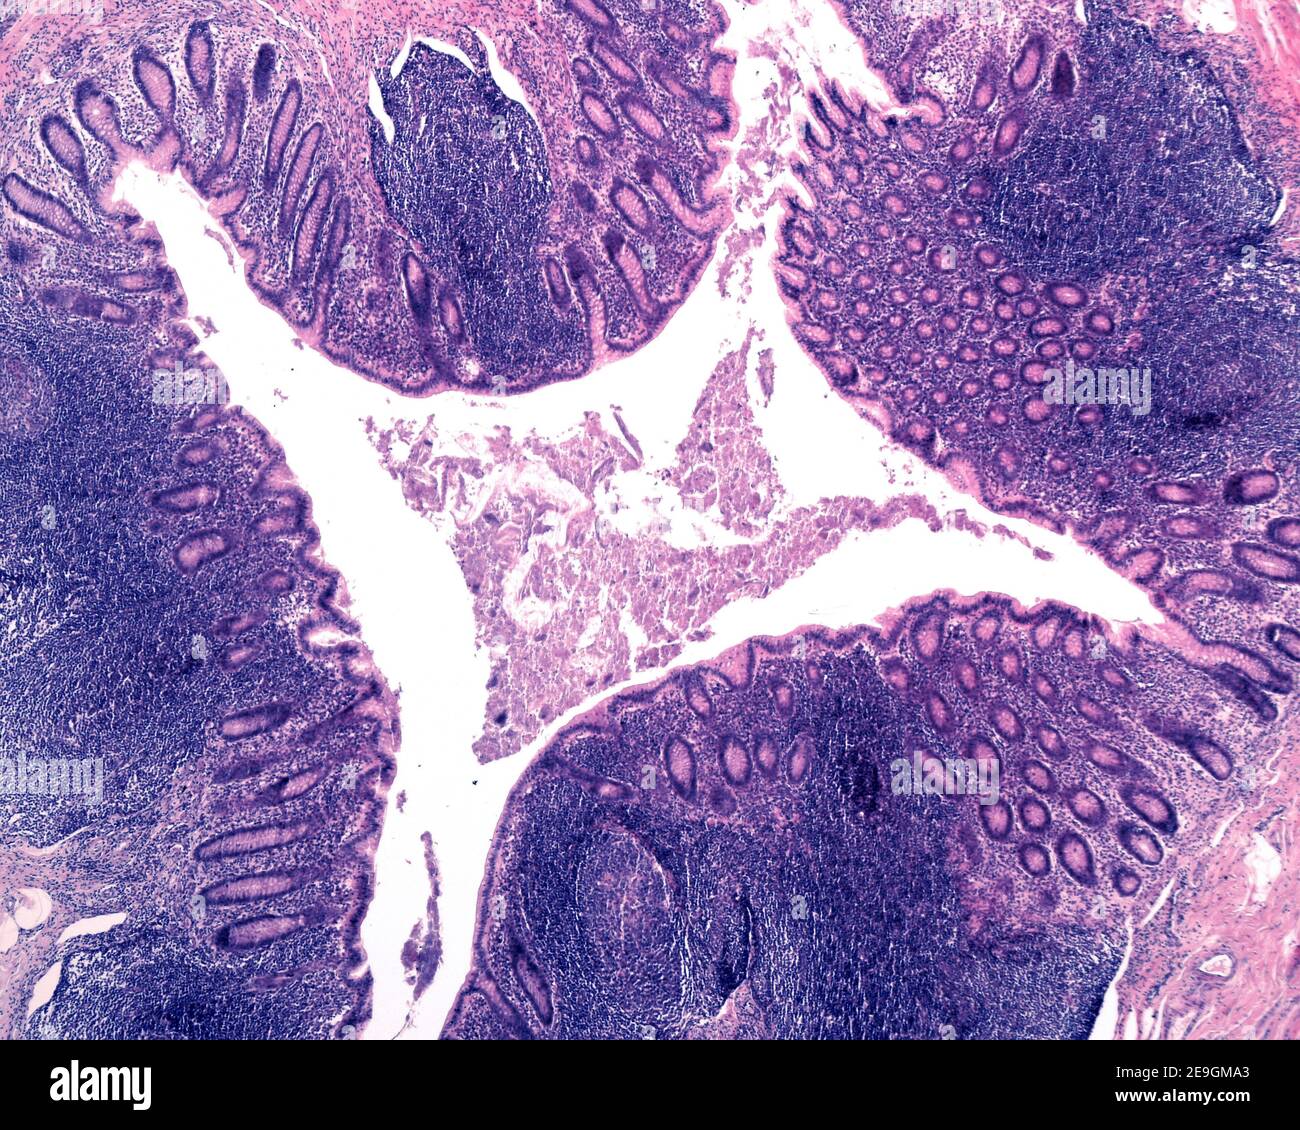 Light micrograph of the mucosa of a very inflamed human vermiform appendix, showing numerous lymphoid follicles and aggregations of inflammatory cells Stock Photo